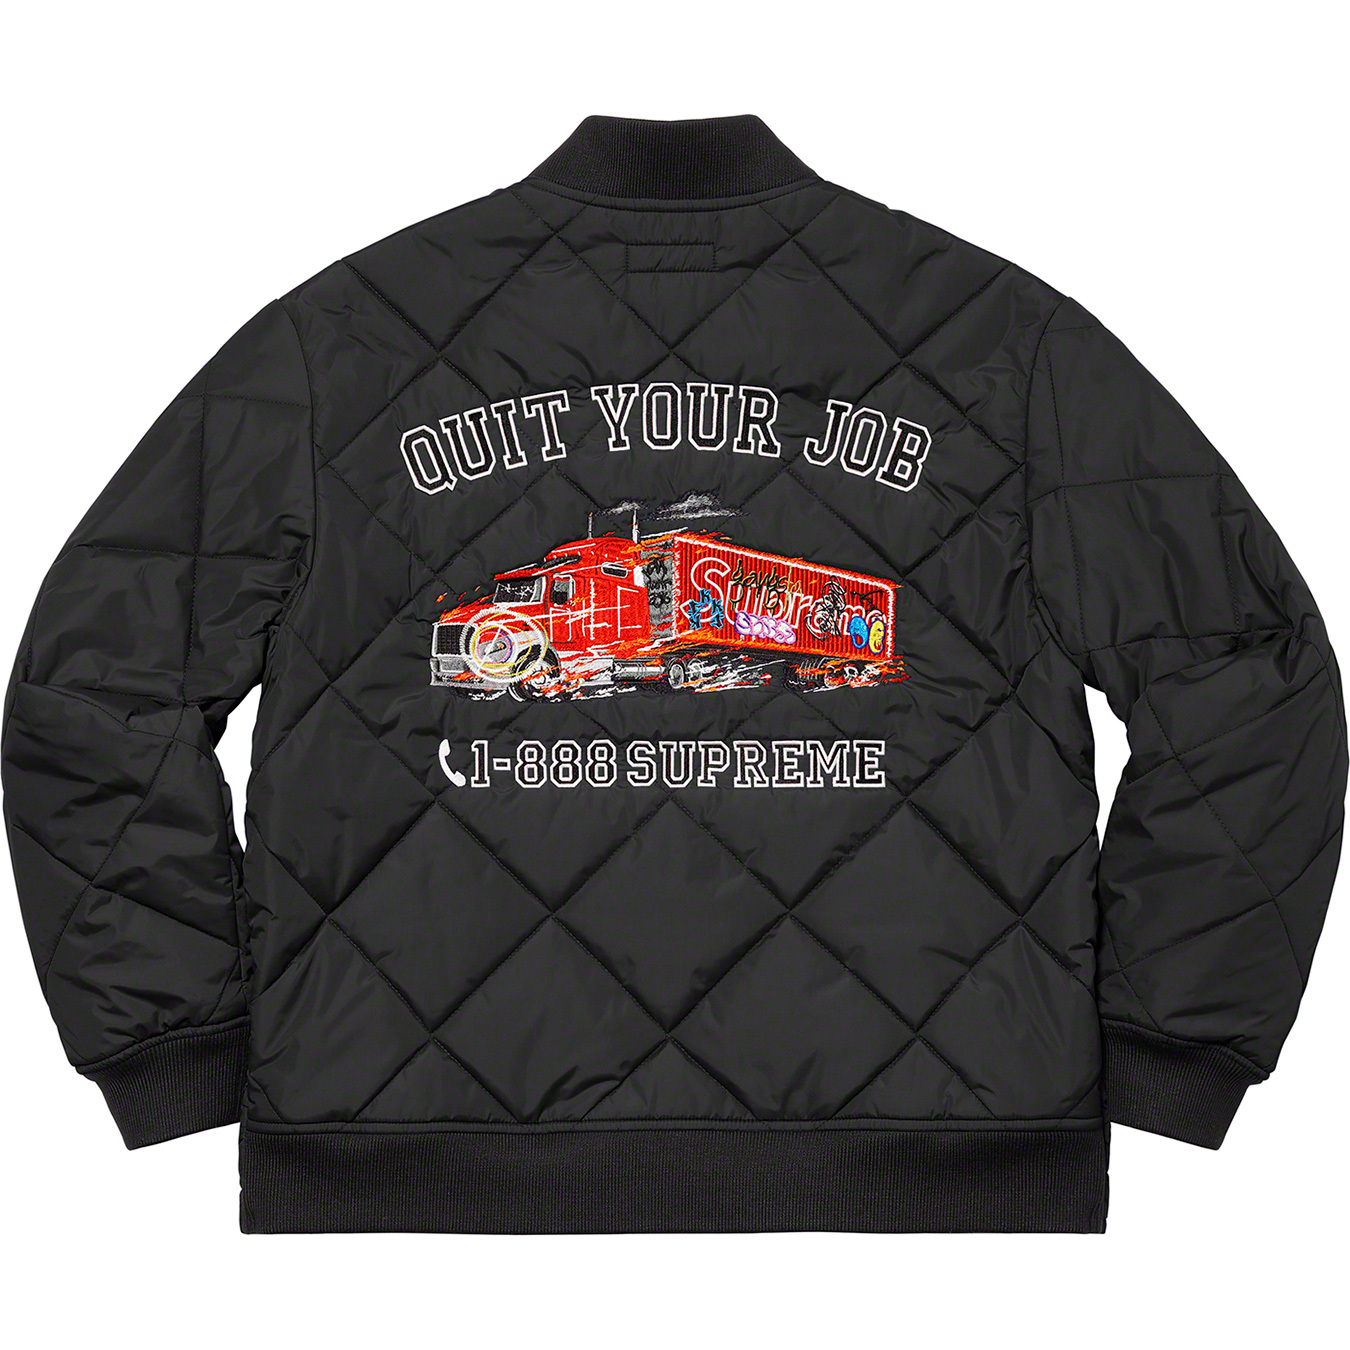 SupremeQuit Your Job Quilted Work Jacket